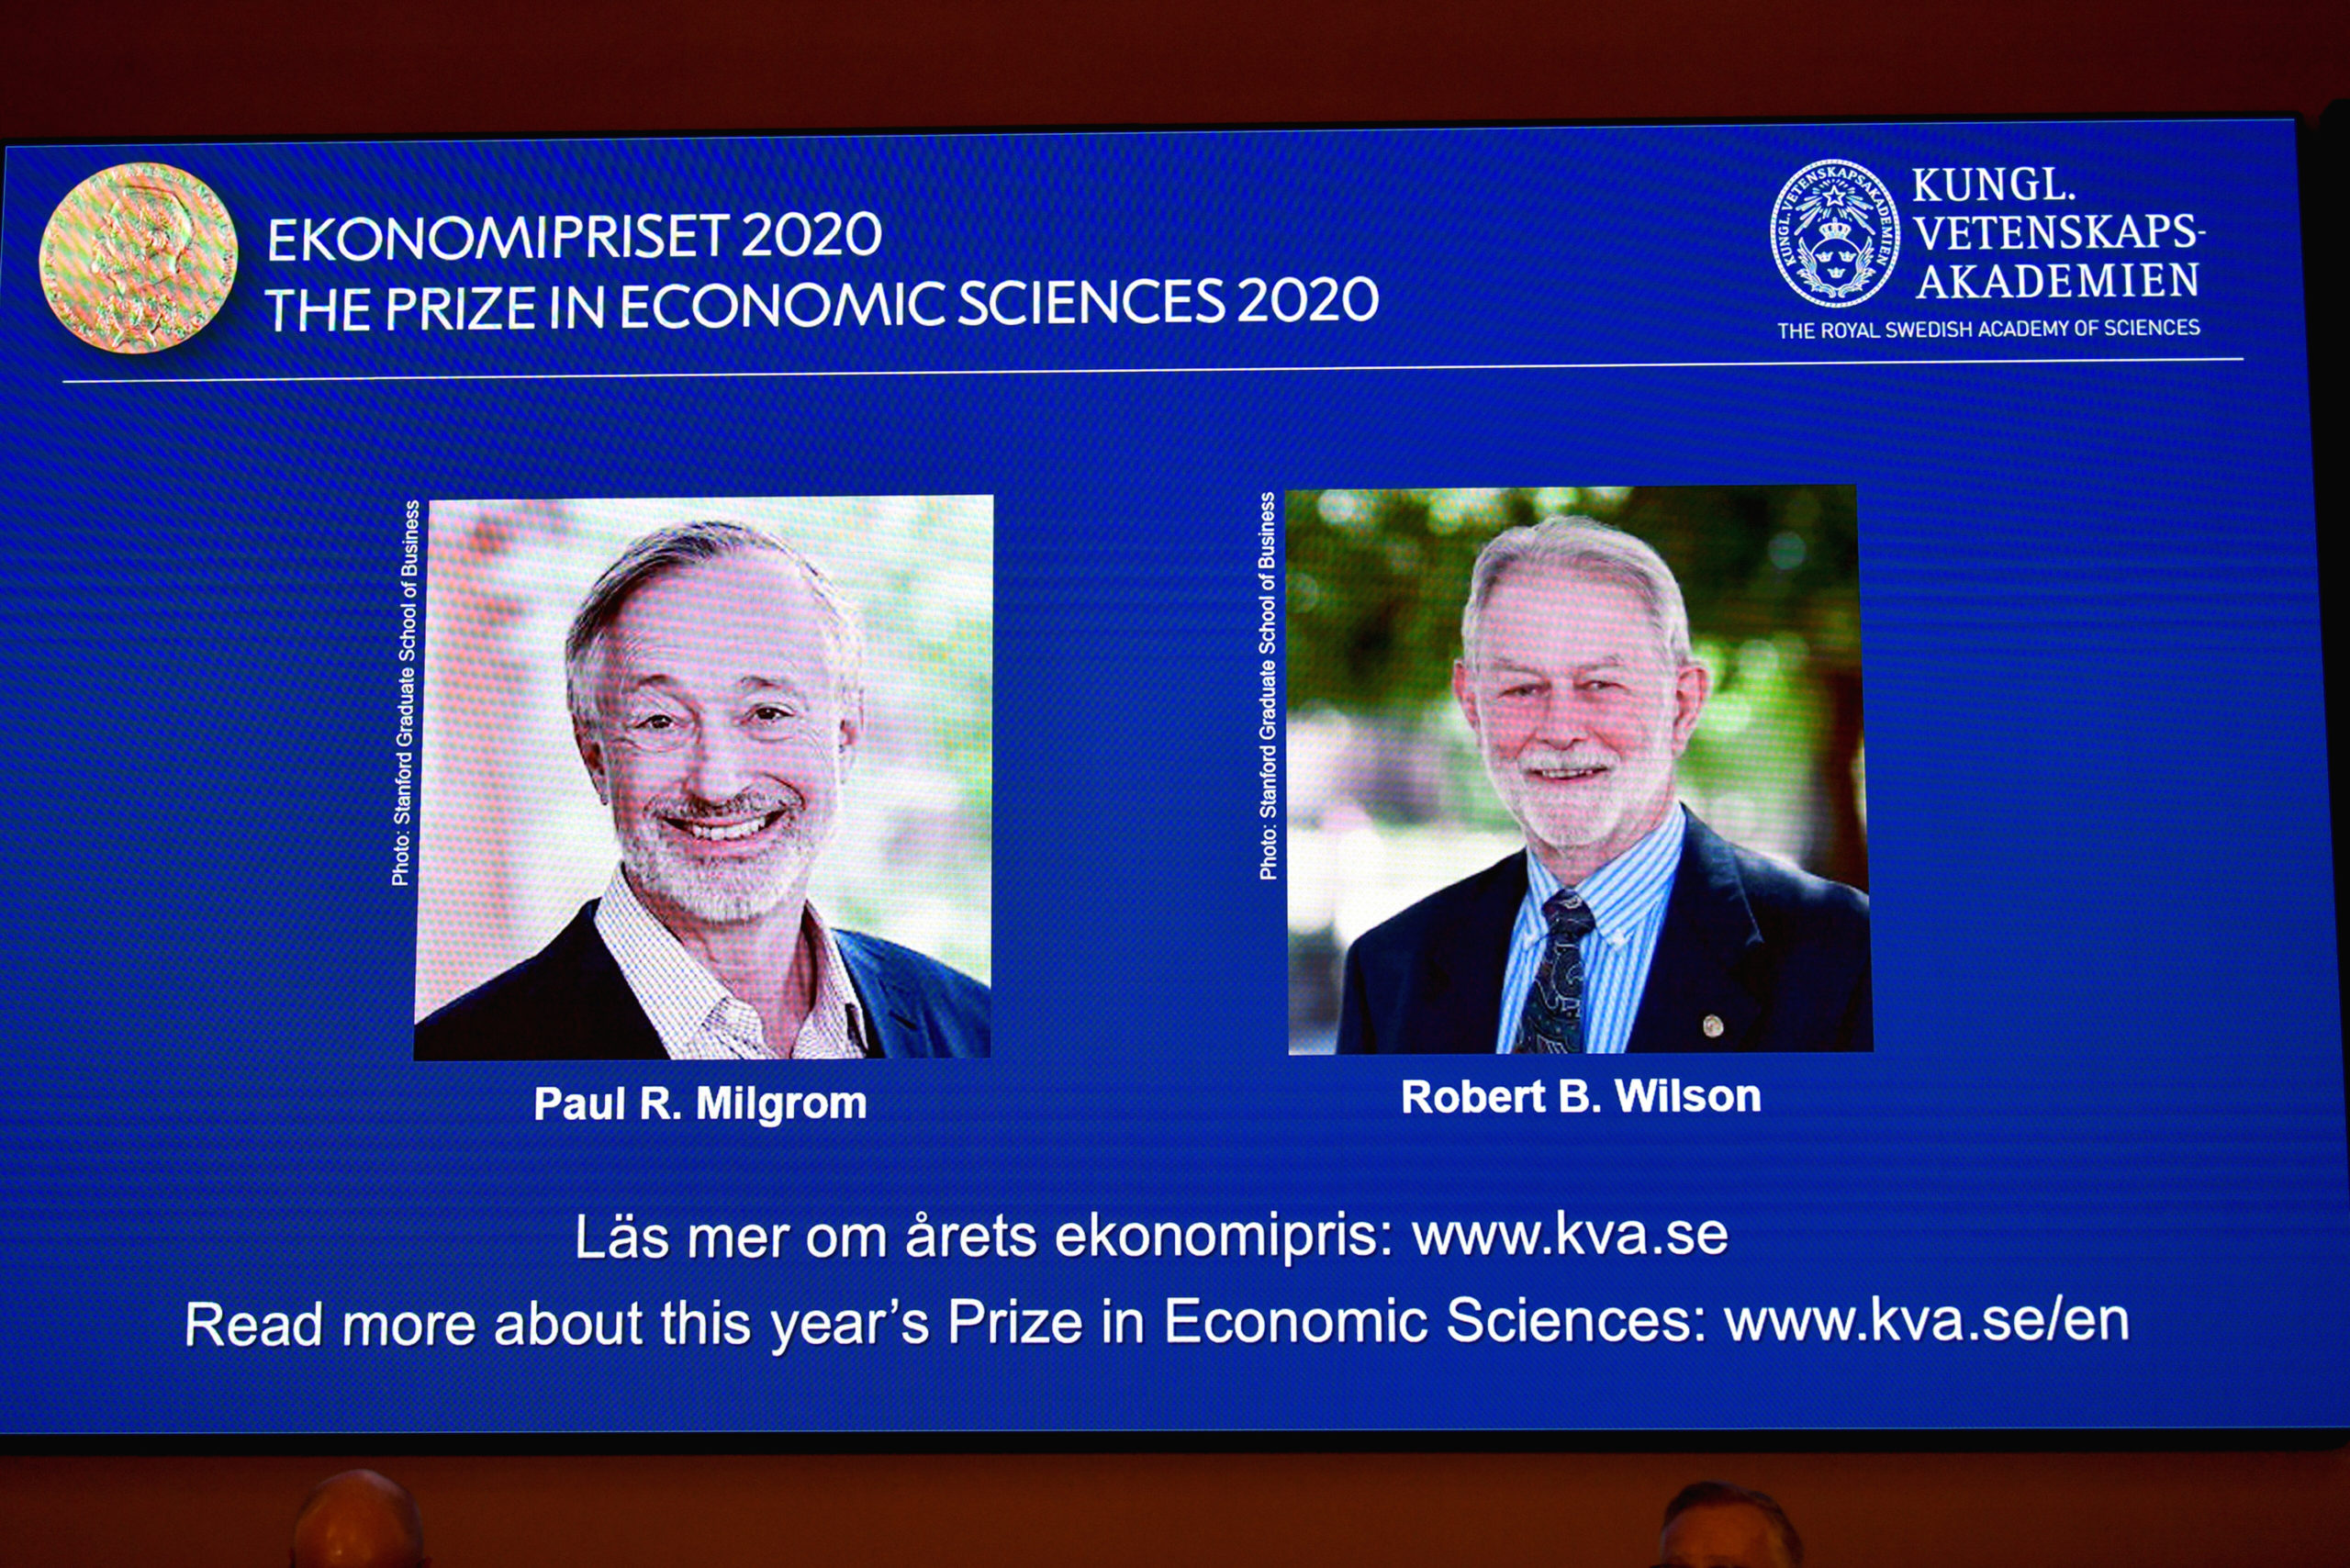 The winners of this year's Nobel prize in economic sciences are